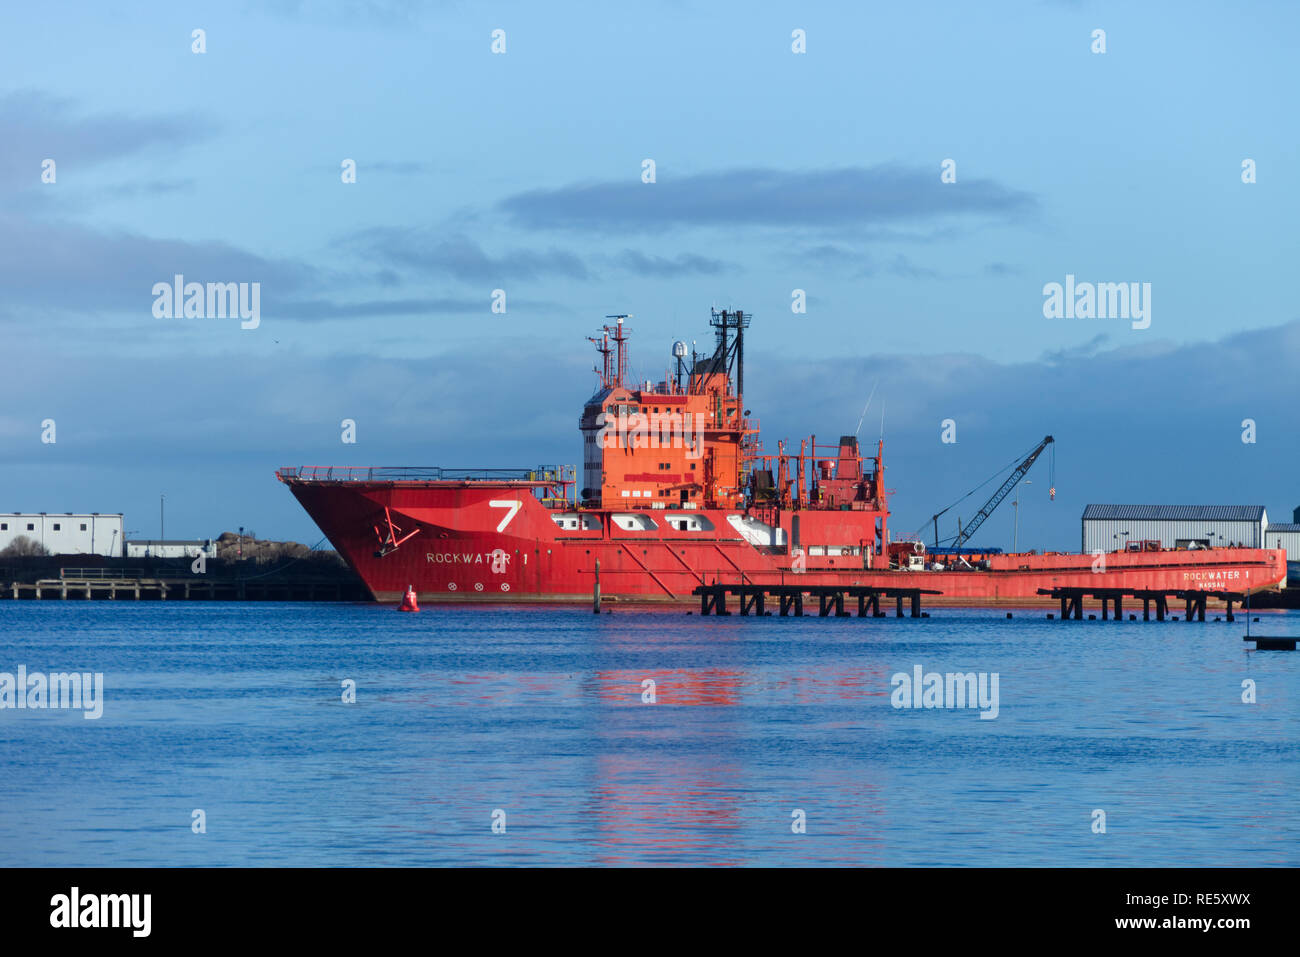 Edinburgh, Scotland / United Kingdom - January 1 2019: A Subsea 7 Oil ship is docked at the Edinburgh harbour of Leith for servicing. Stock Photo